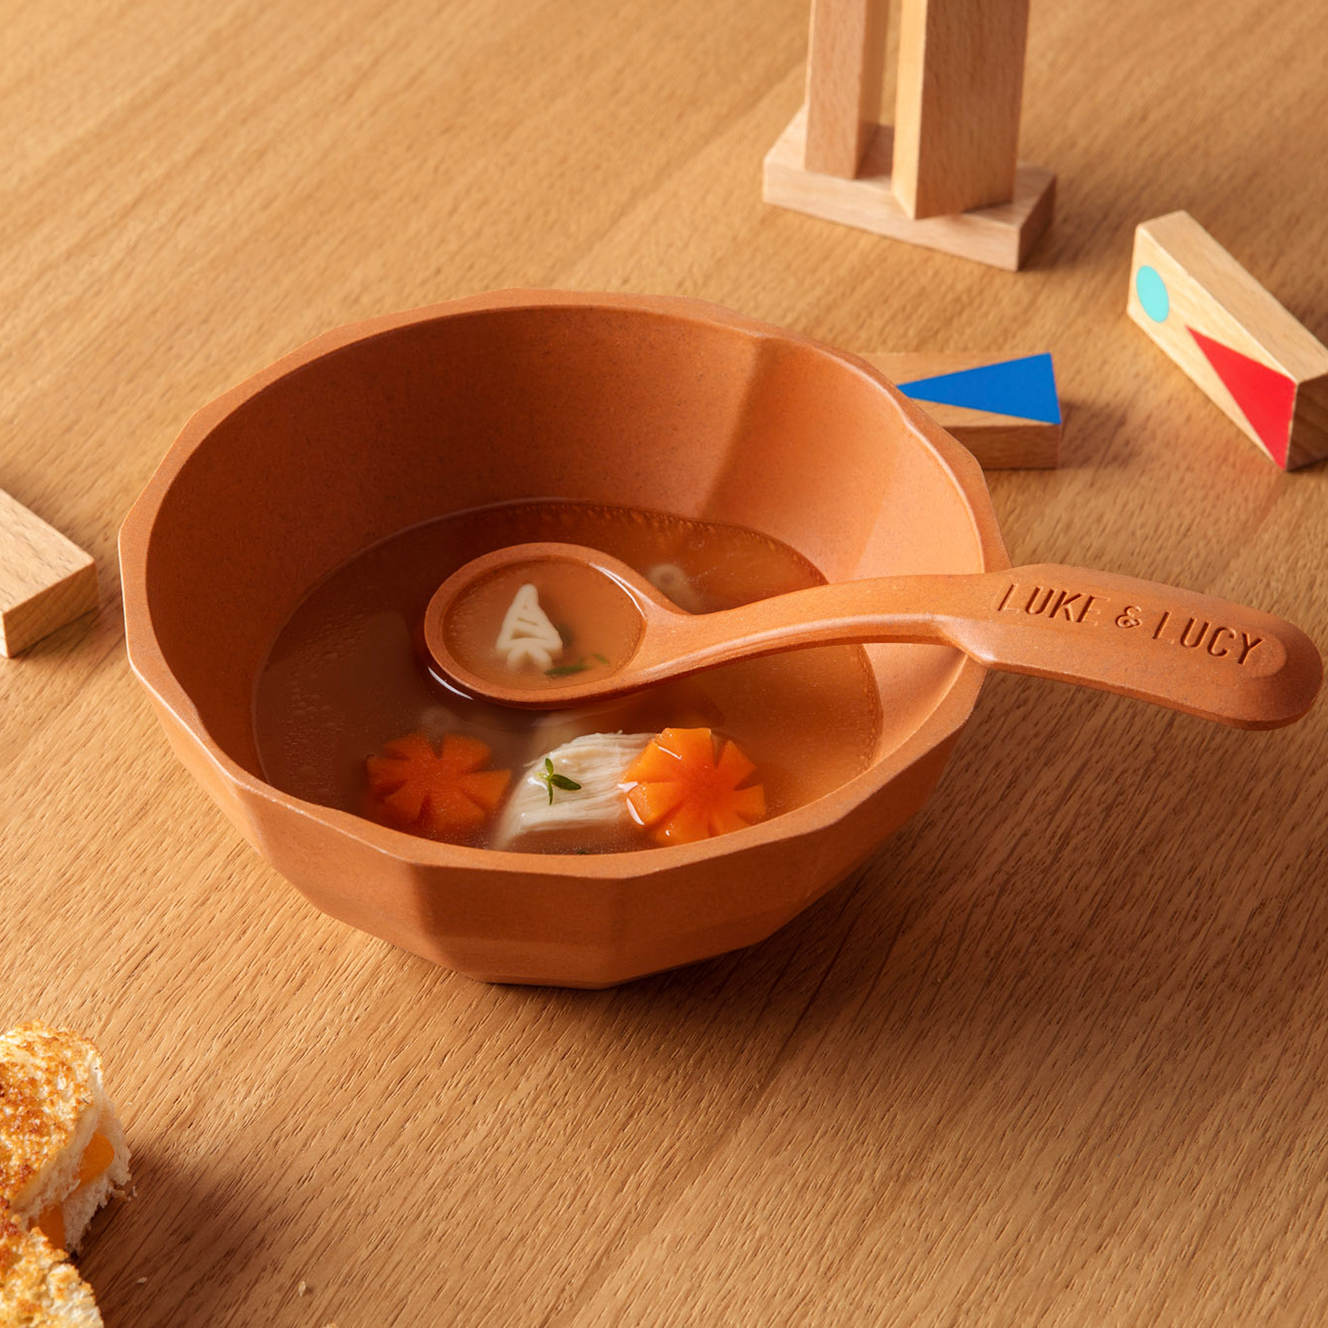 Channel Bowl Mini and Pairing Spoon | Bamboo-blend